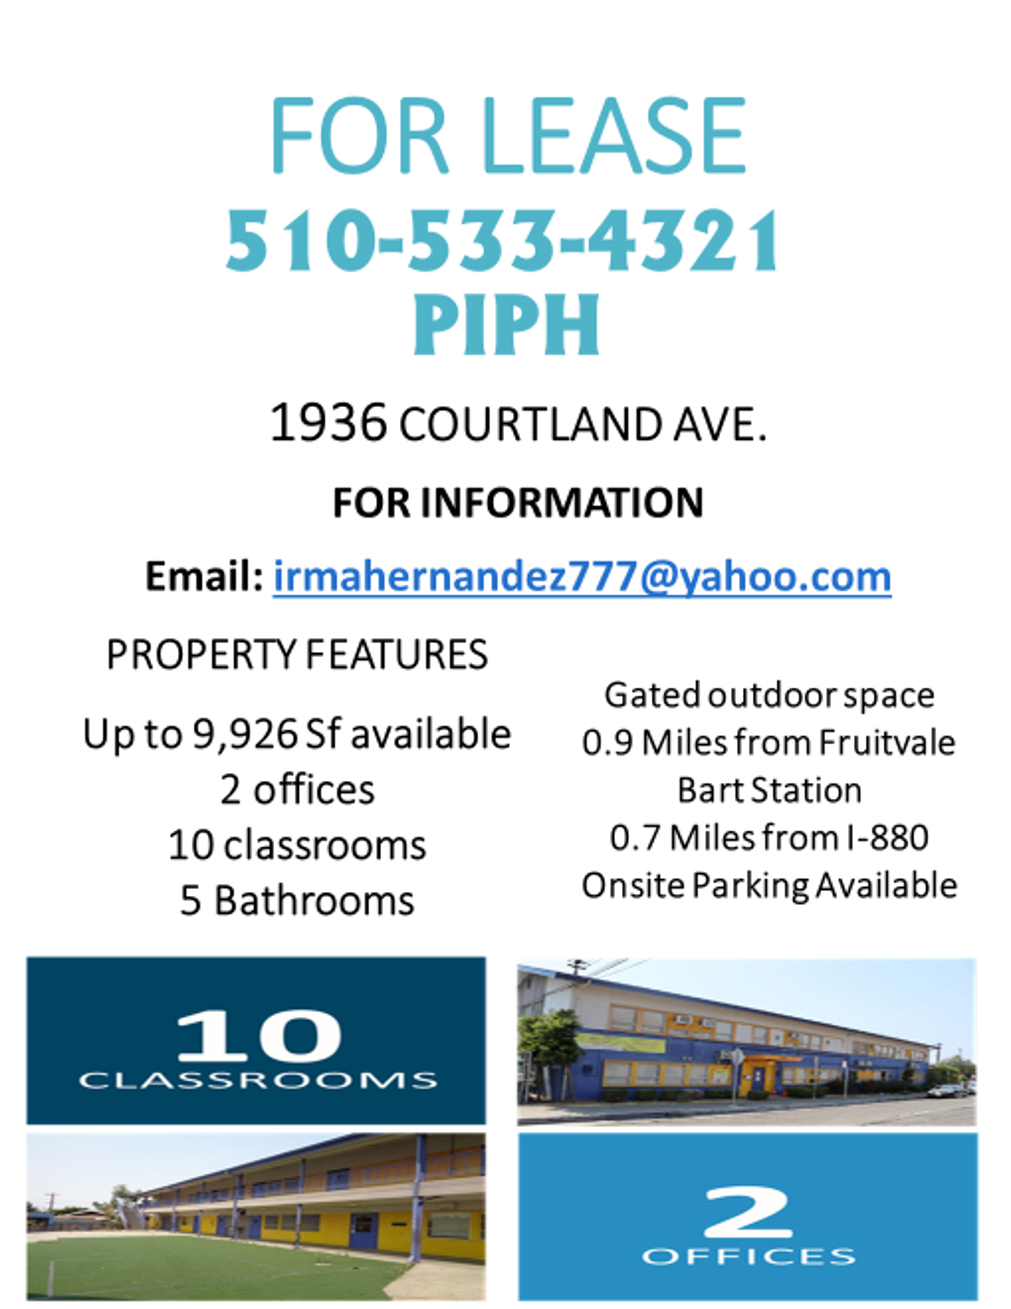 flyer-for-lease-building.png